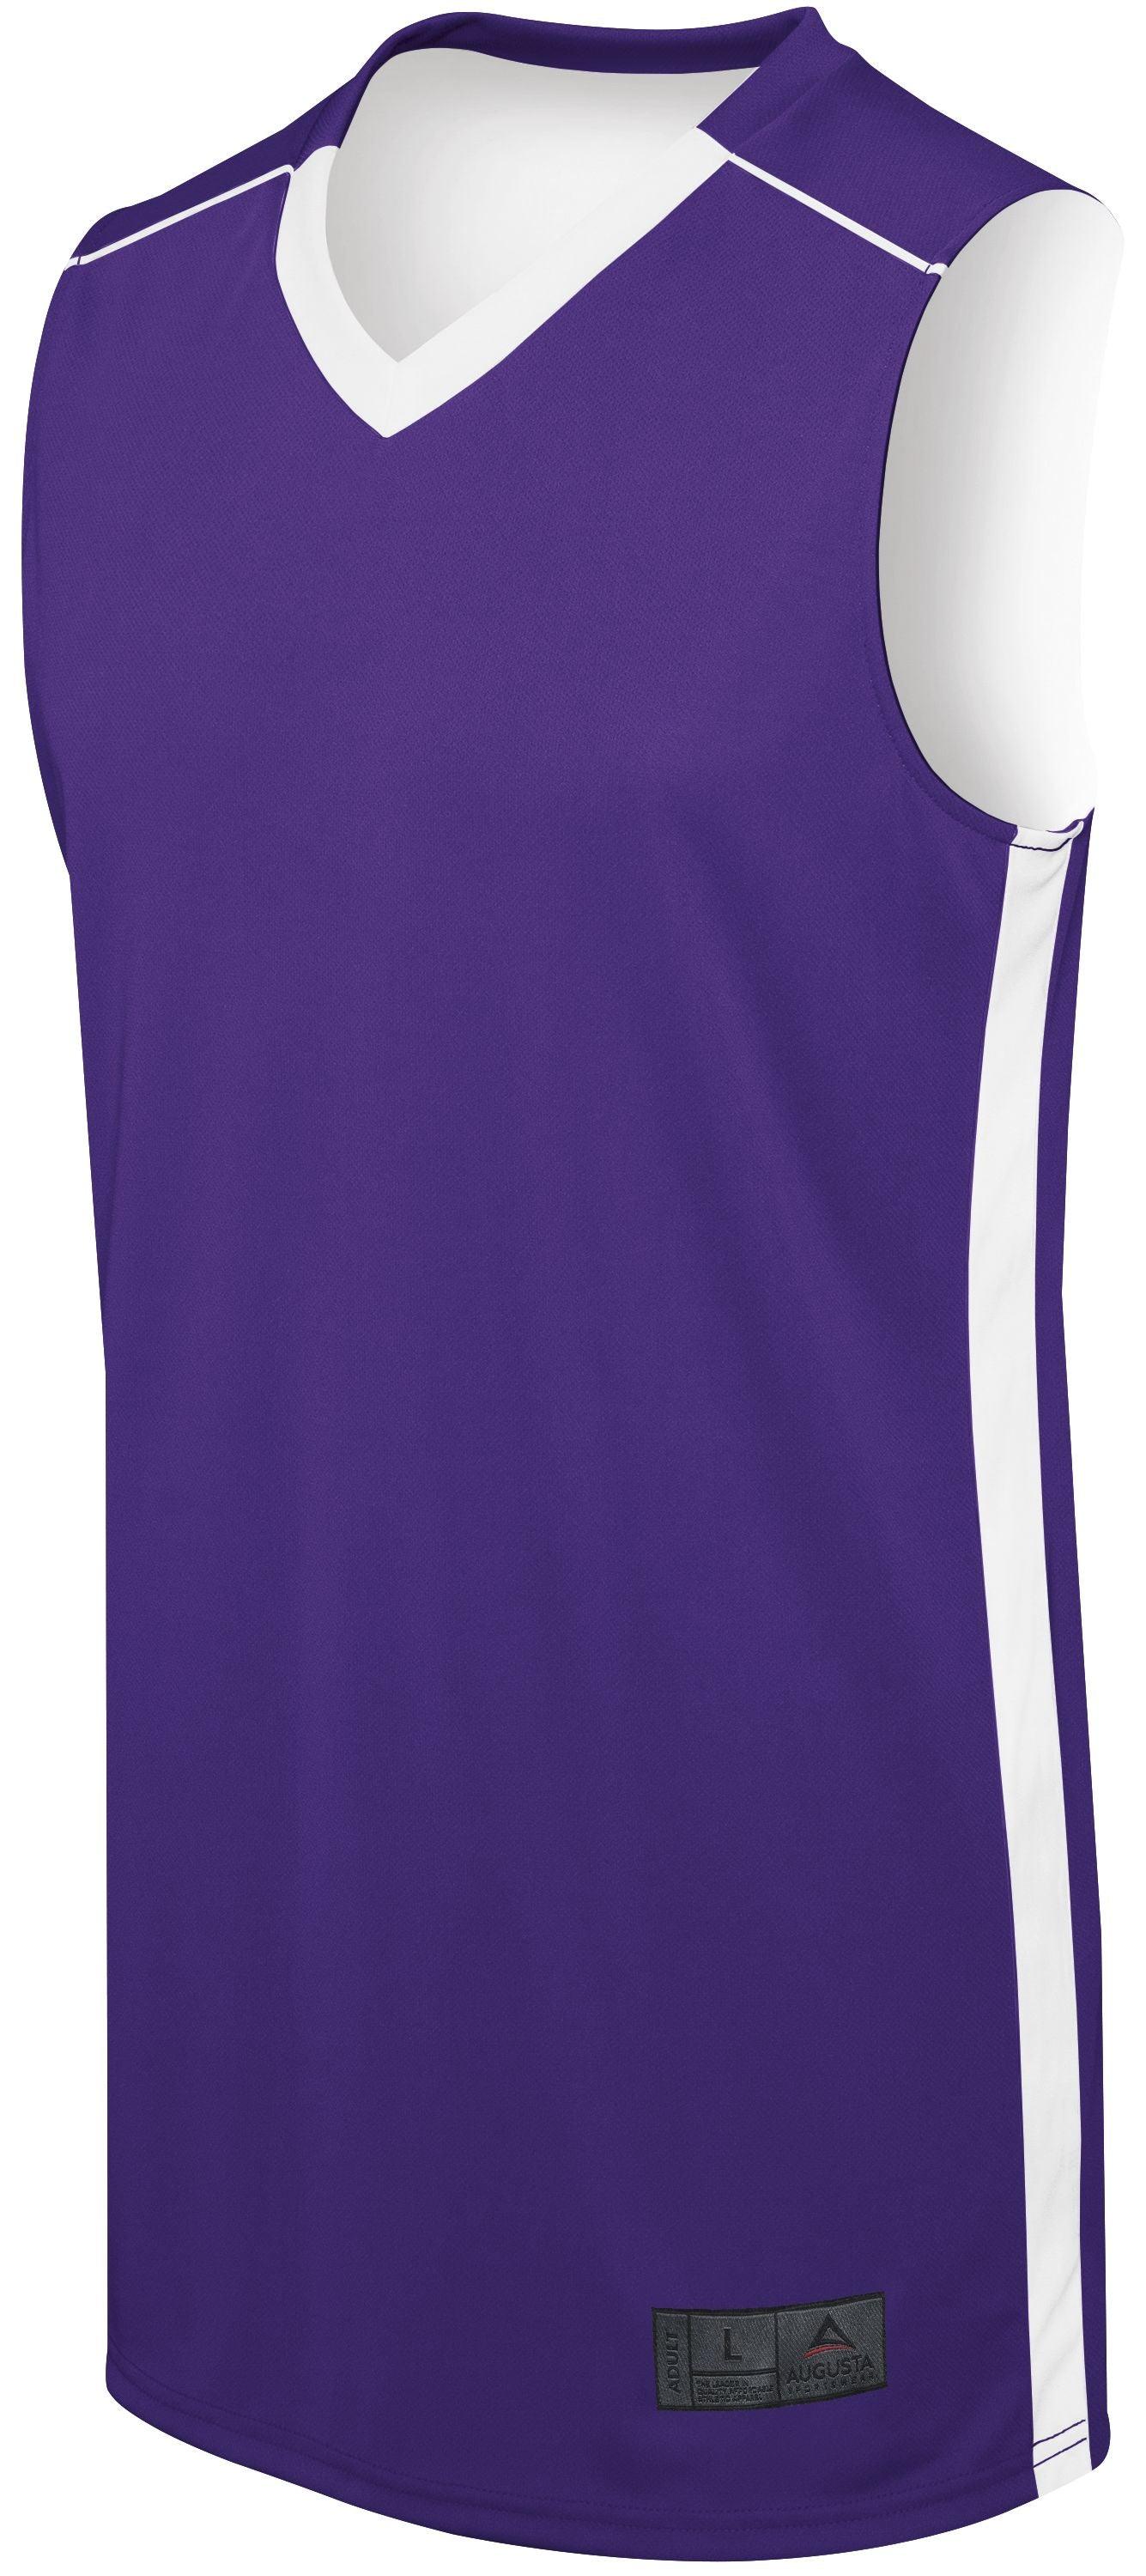 Adult Competition Reversible Jersey - Dresses Max